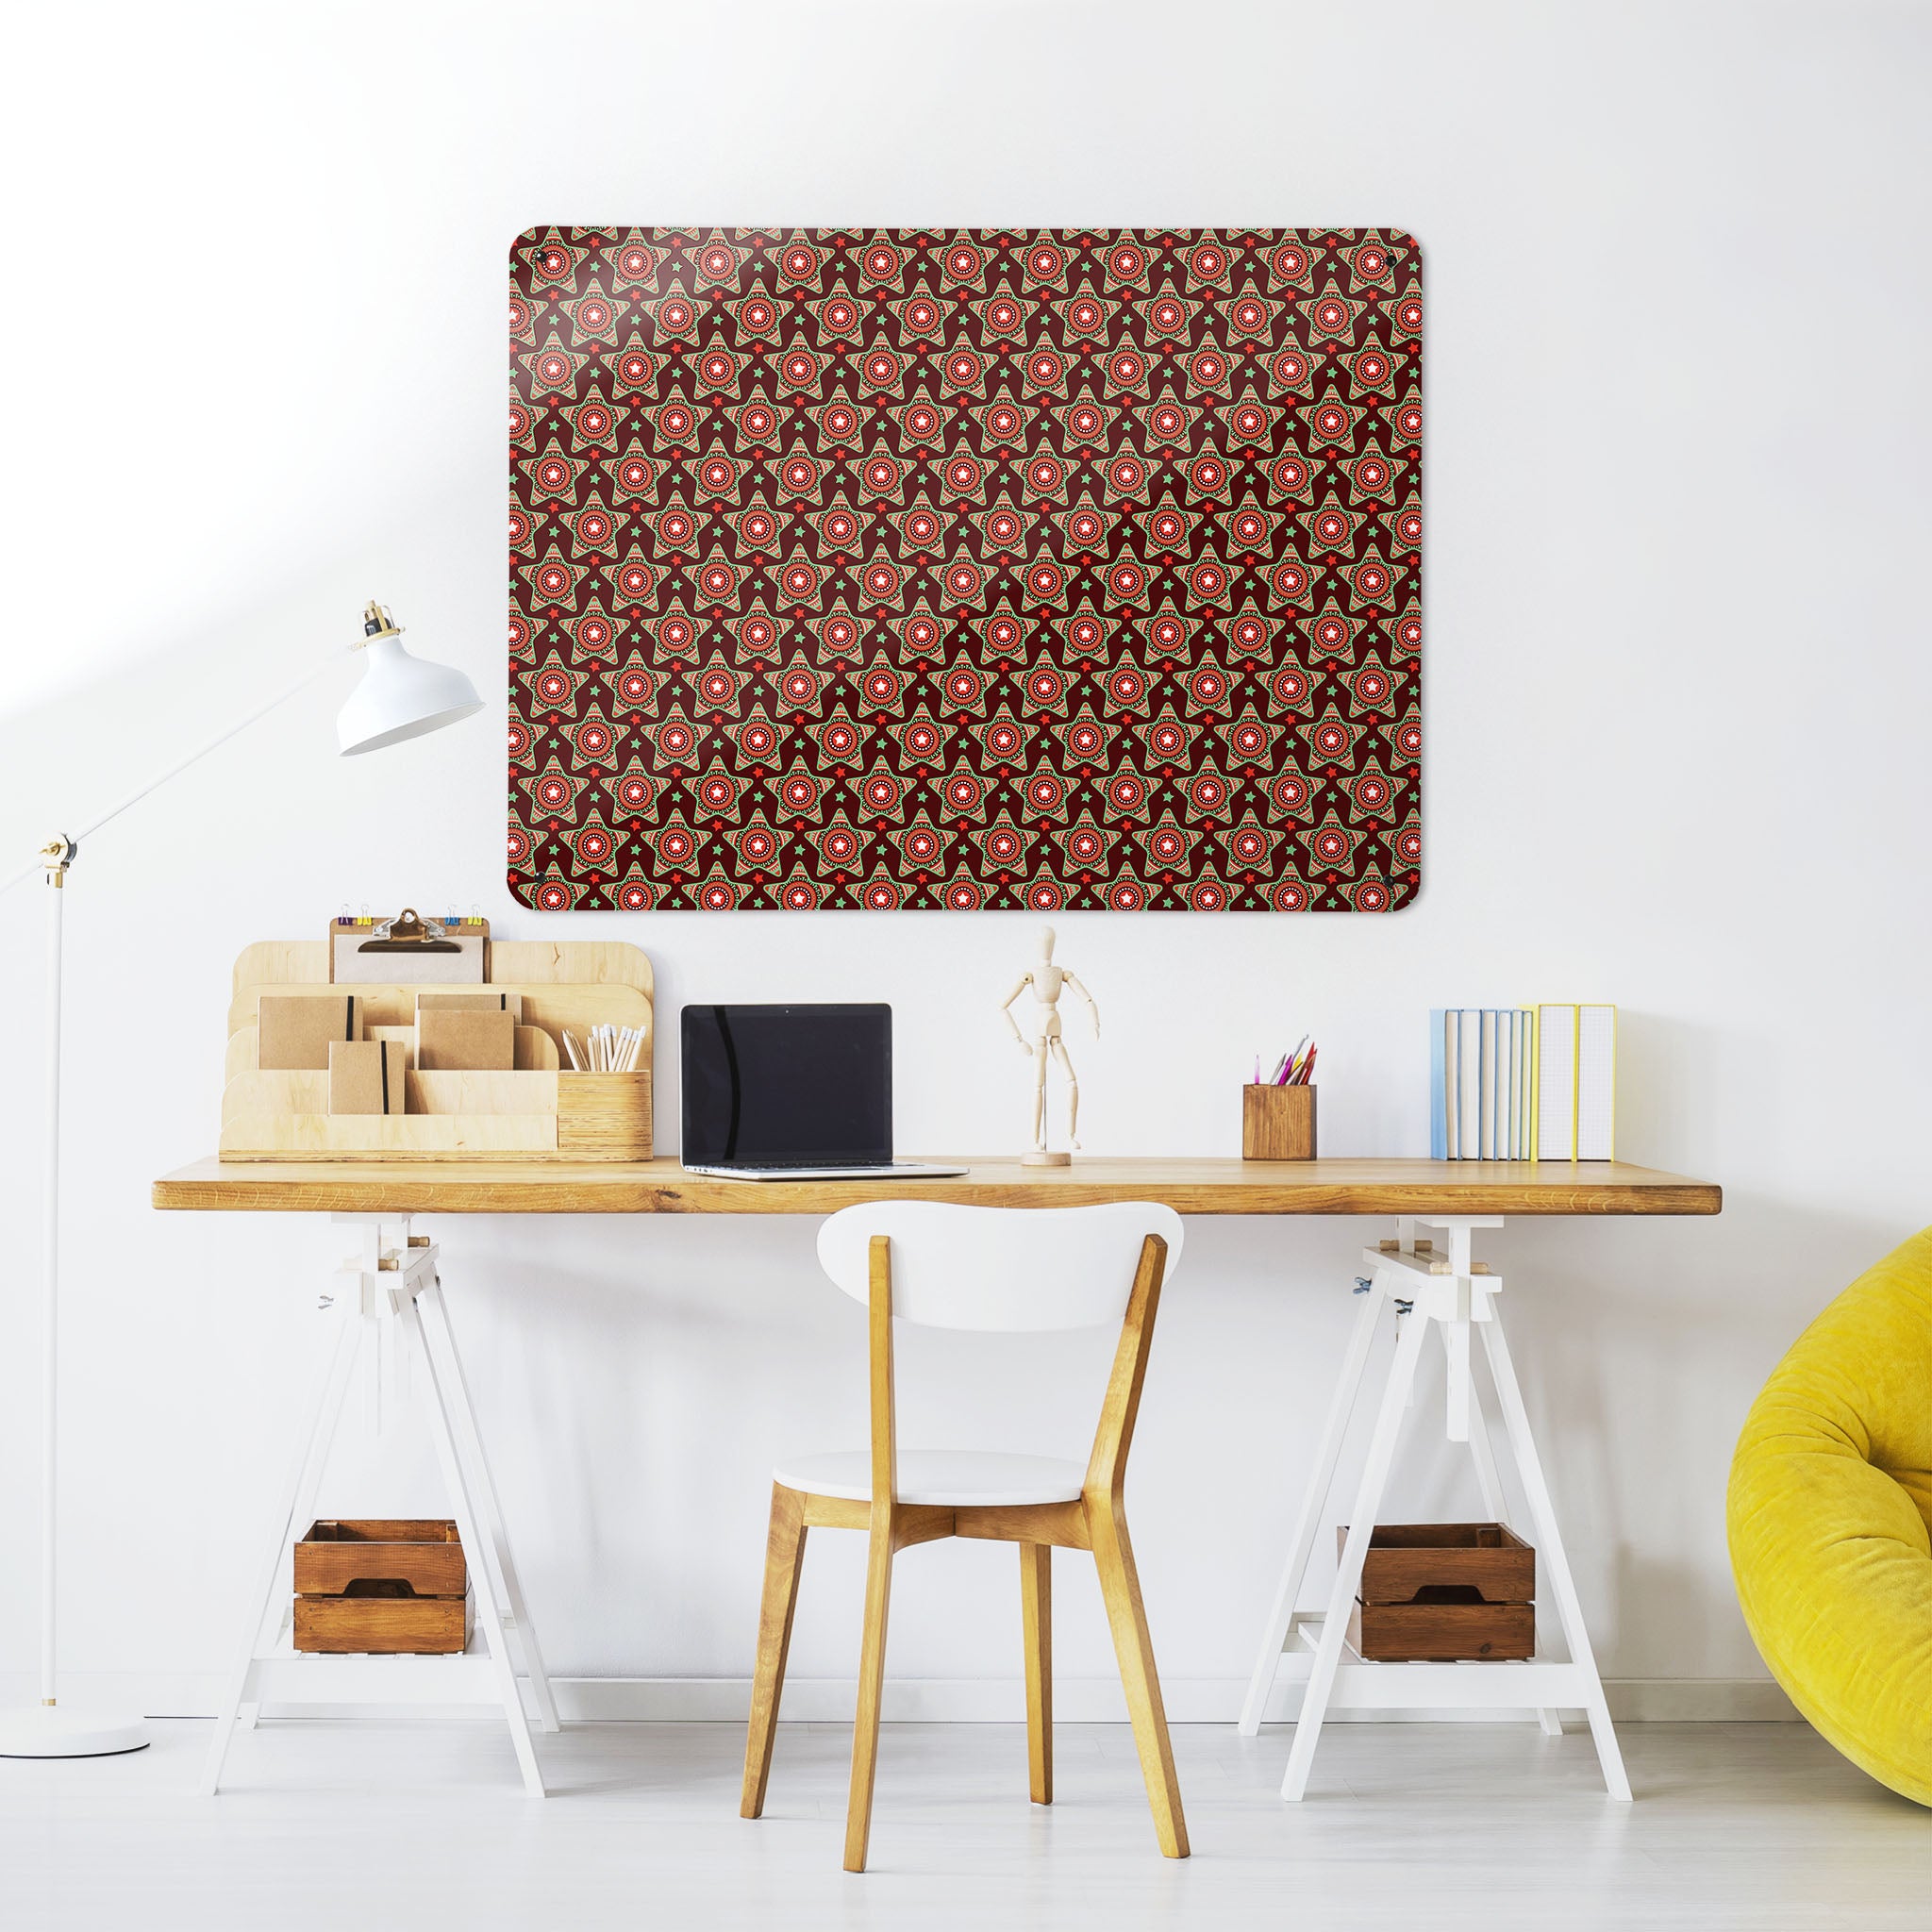 A desk in a workspace setting in a white interior with a magnetic metal wall art panel showing a stars on maroon repeat pattern design